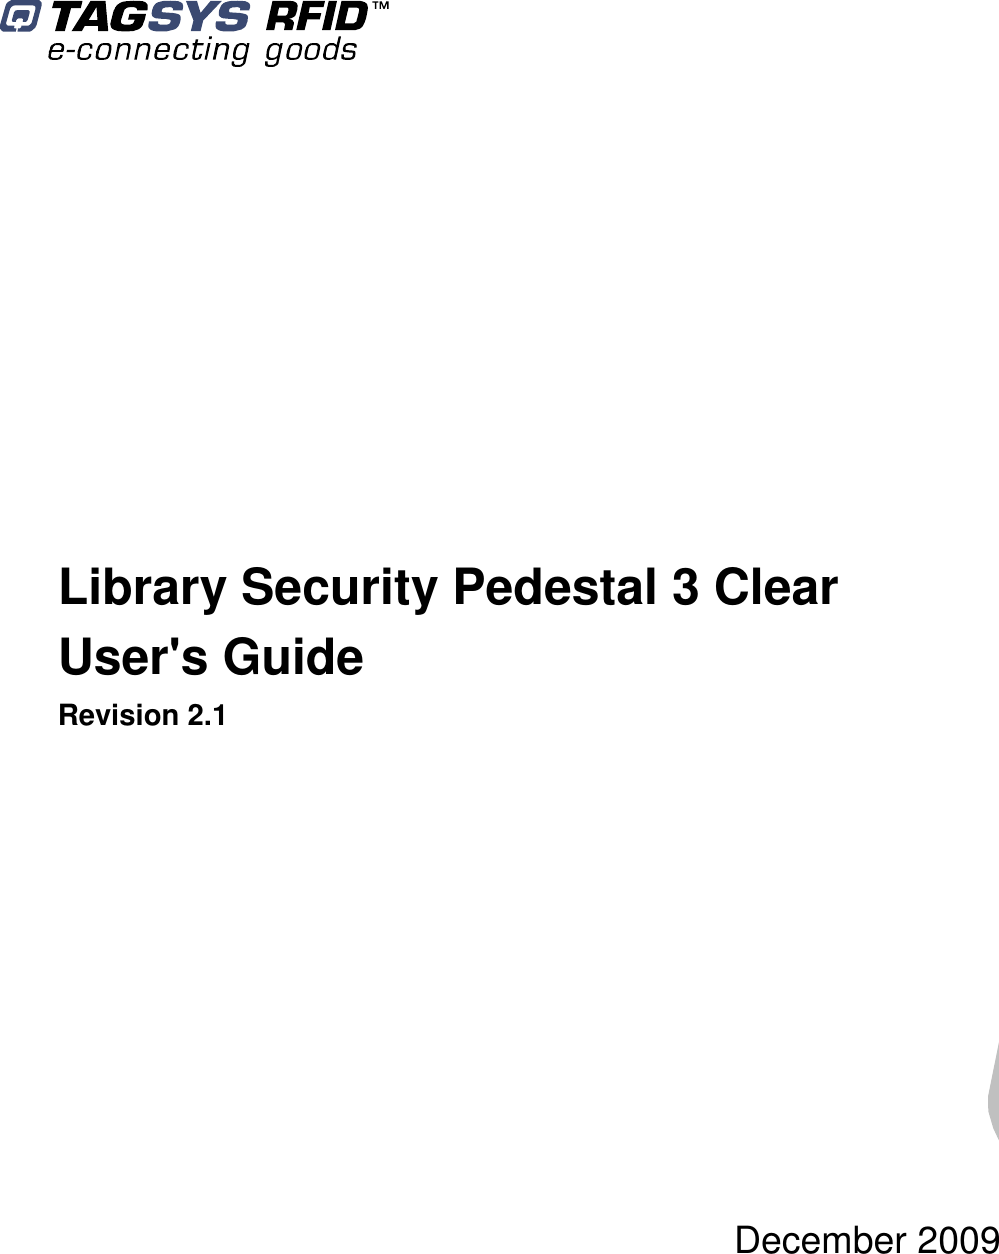           Library Security Pedestal 3 Clear User&apos;s Guide Revision 2.1  December 2009    